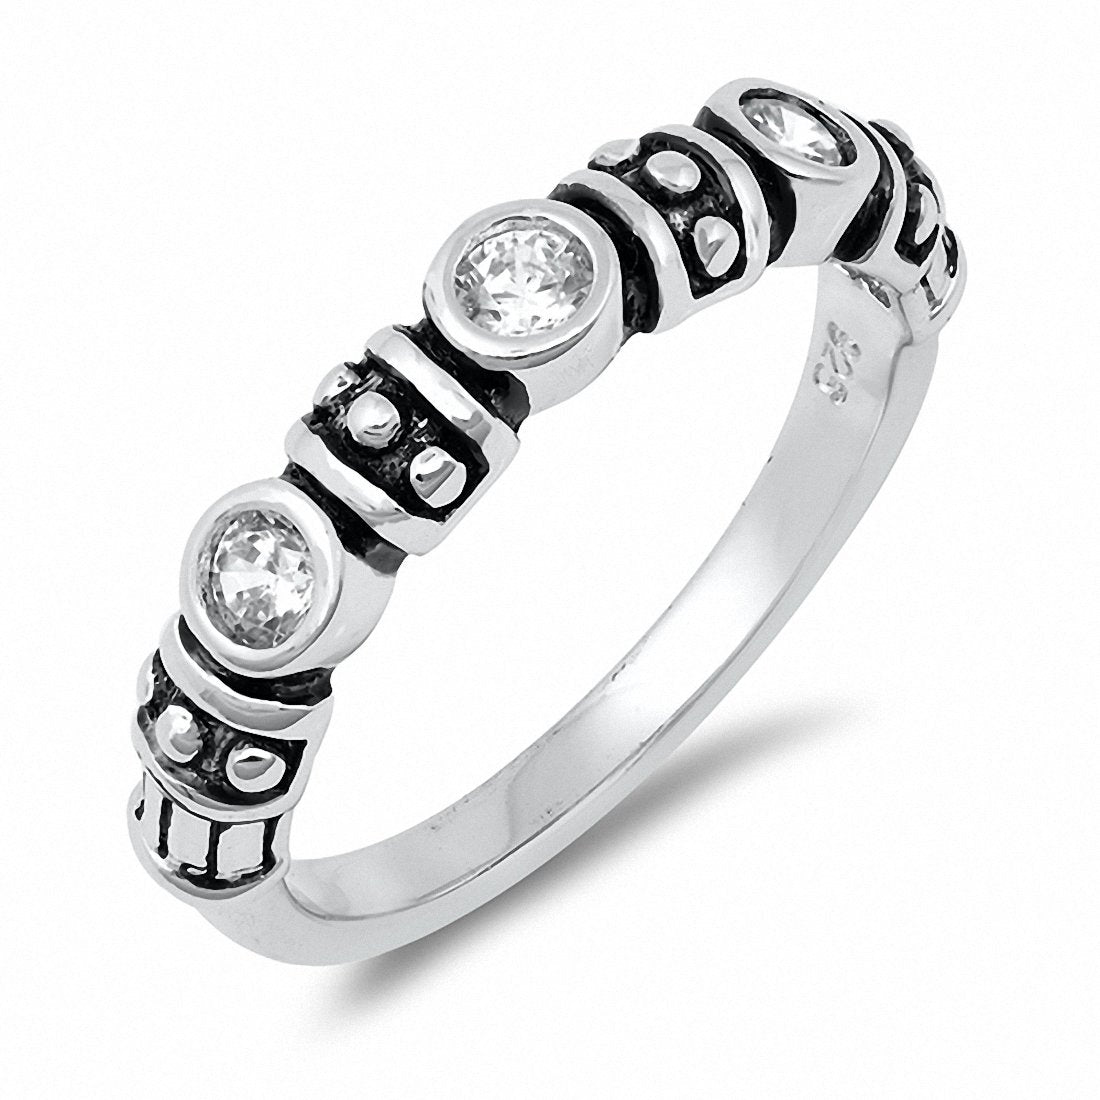 Bali Design Band Round Cubic Zirconia 925 Sterling Silver Choose Color